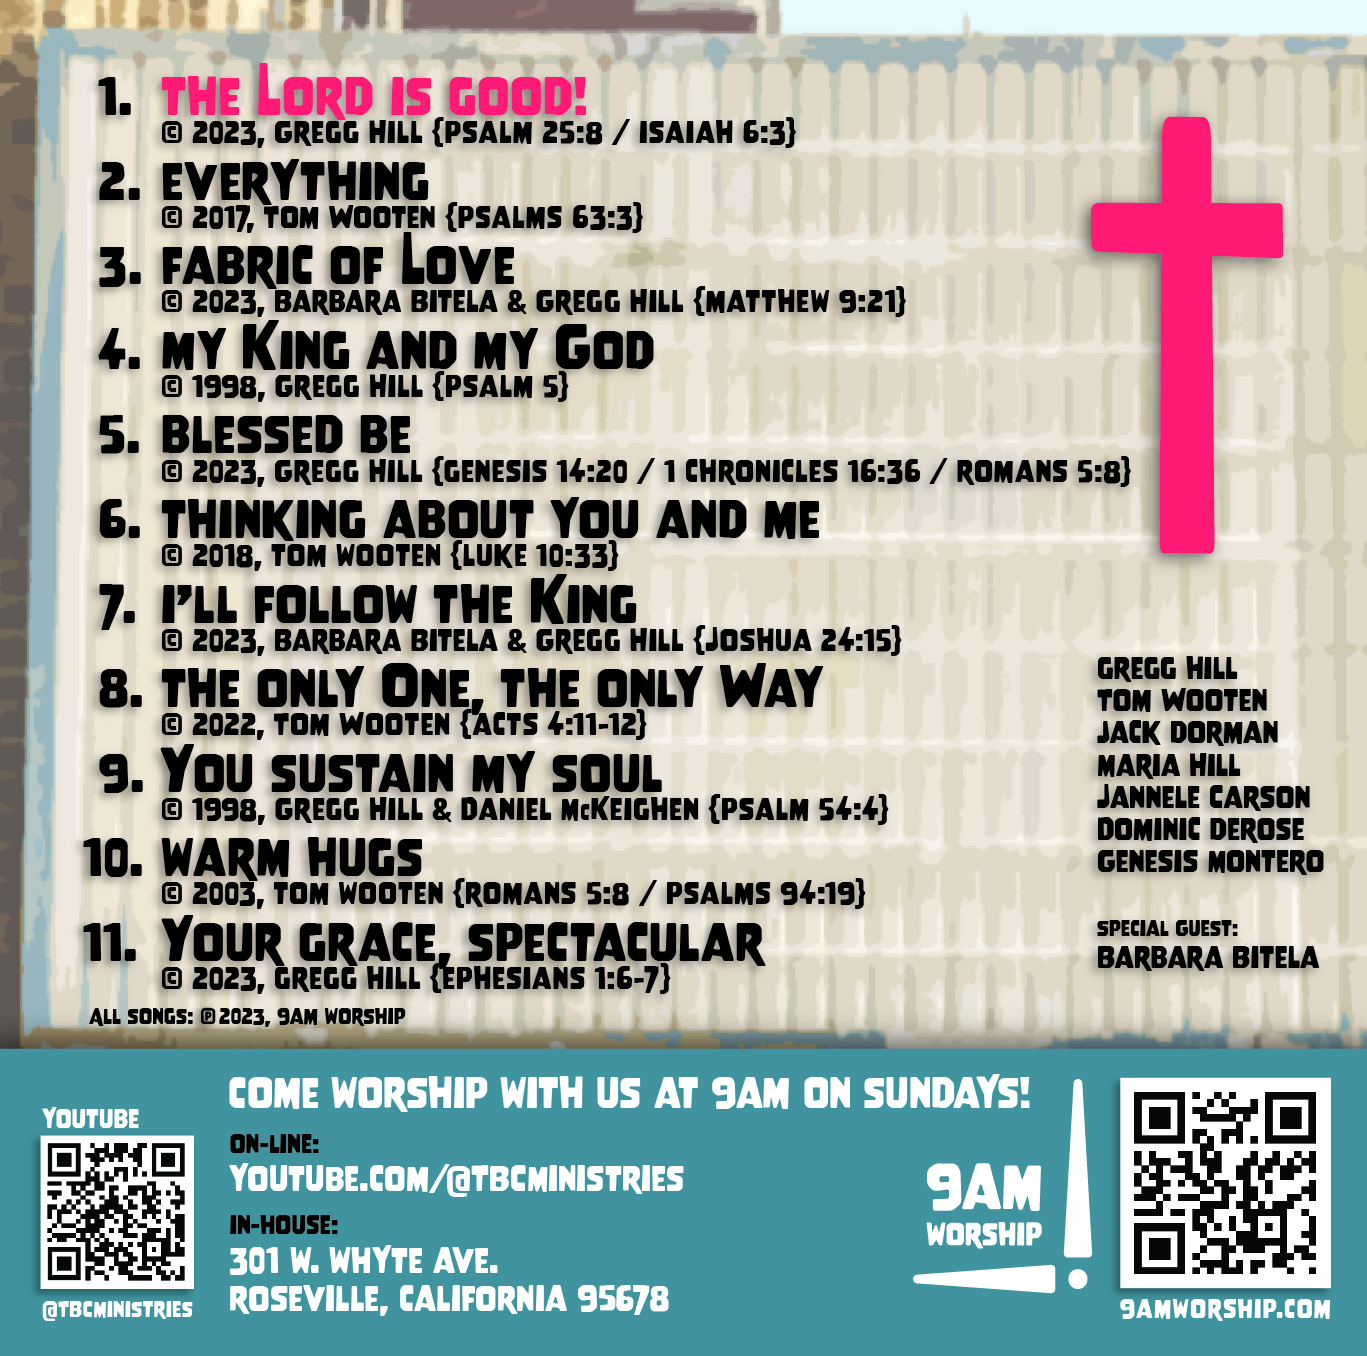 Album insert for "the Lord is good!" by 9am worship